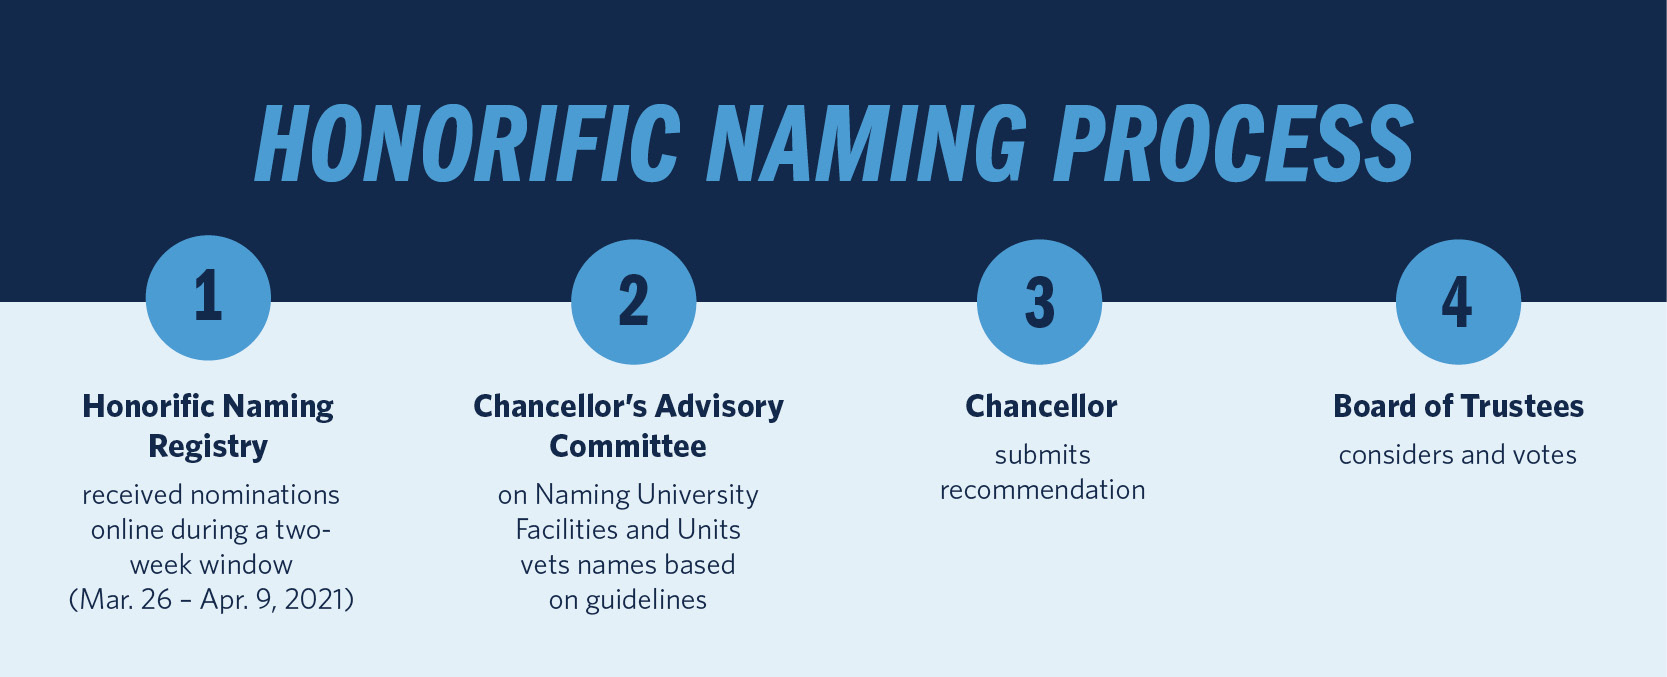 HONORIFIC NAMING PROCESS 1. Honorific Naming Registry received nominations online during a two-week window (March 26-April 9, 2021) 2. Chancellor’s Advisory Committee on Naming University Facilities and Units vets names based on guidelines 3. Chancellor submits recommendation 4. Board of Trustees considers and votes